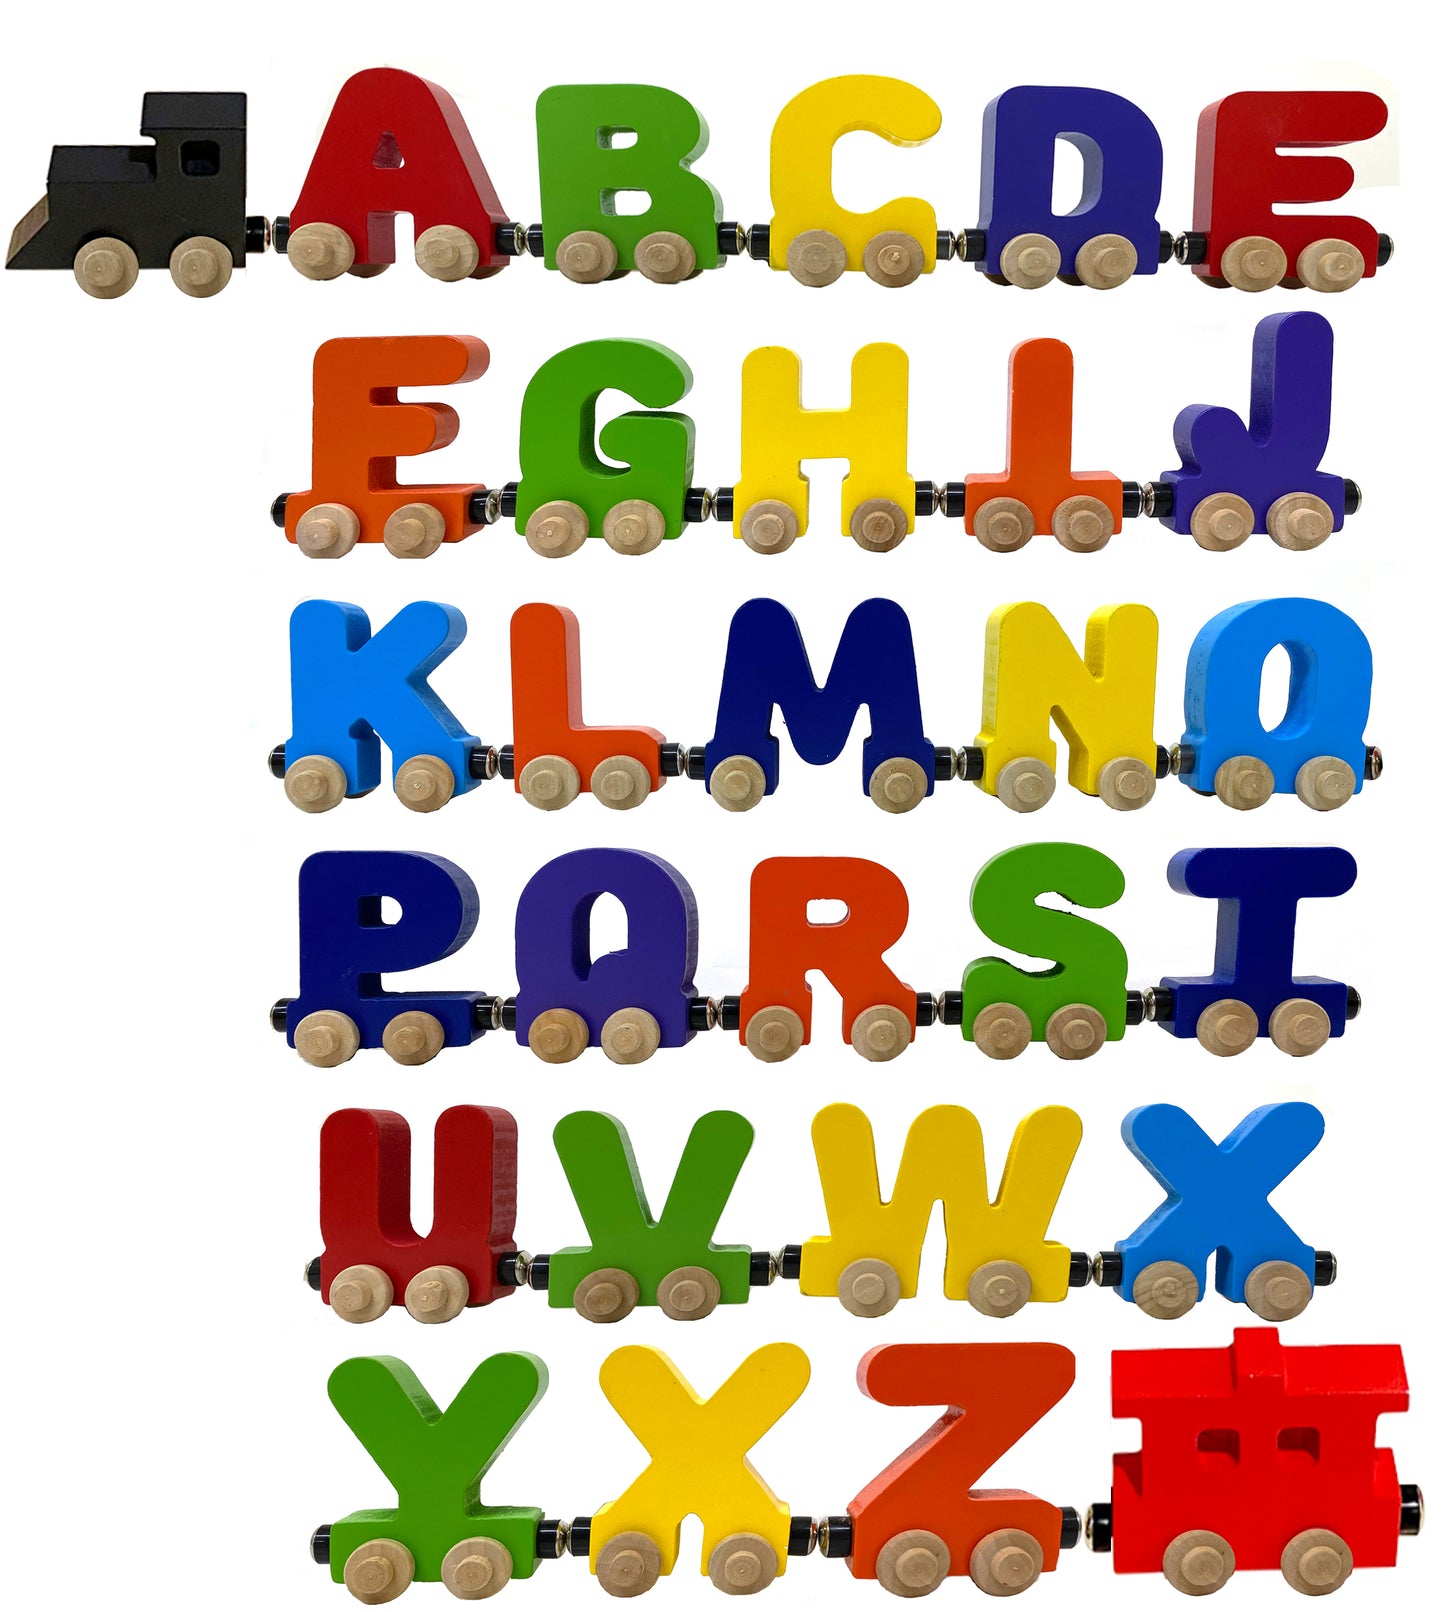 5 Letter Train Wooden Perosnalized Name Letters Includes Train & Wagon Letters Puzzle Includes Train & Wagon Free